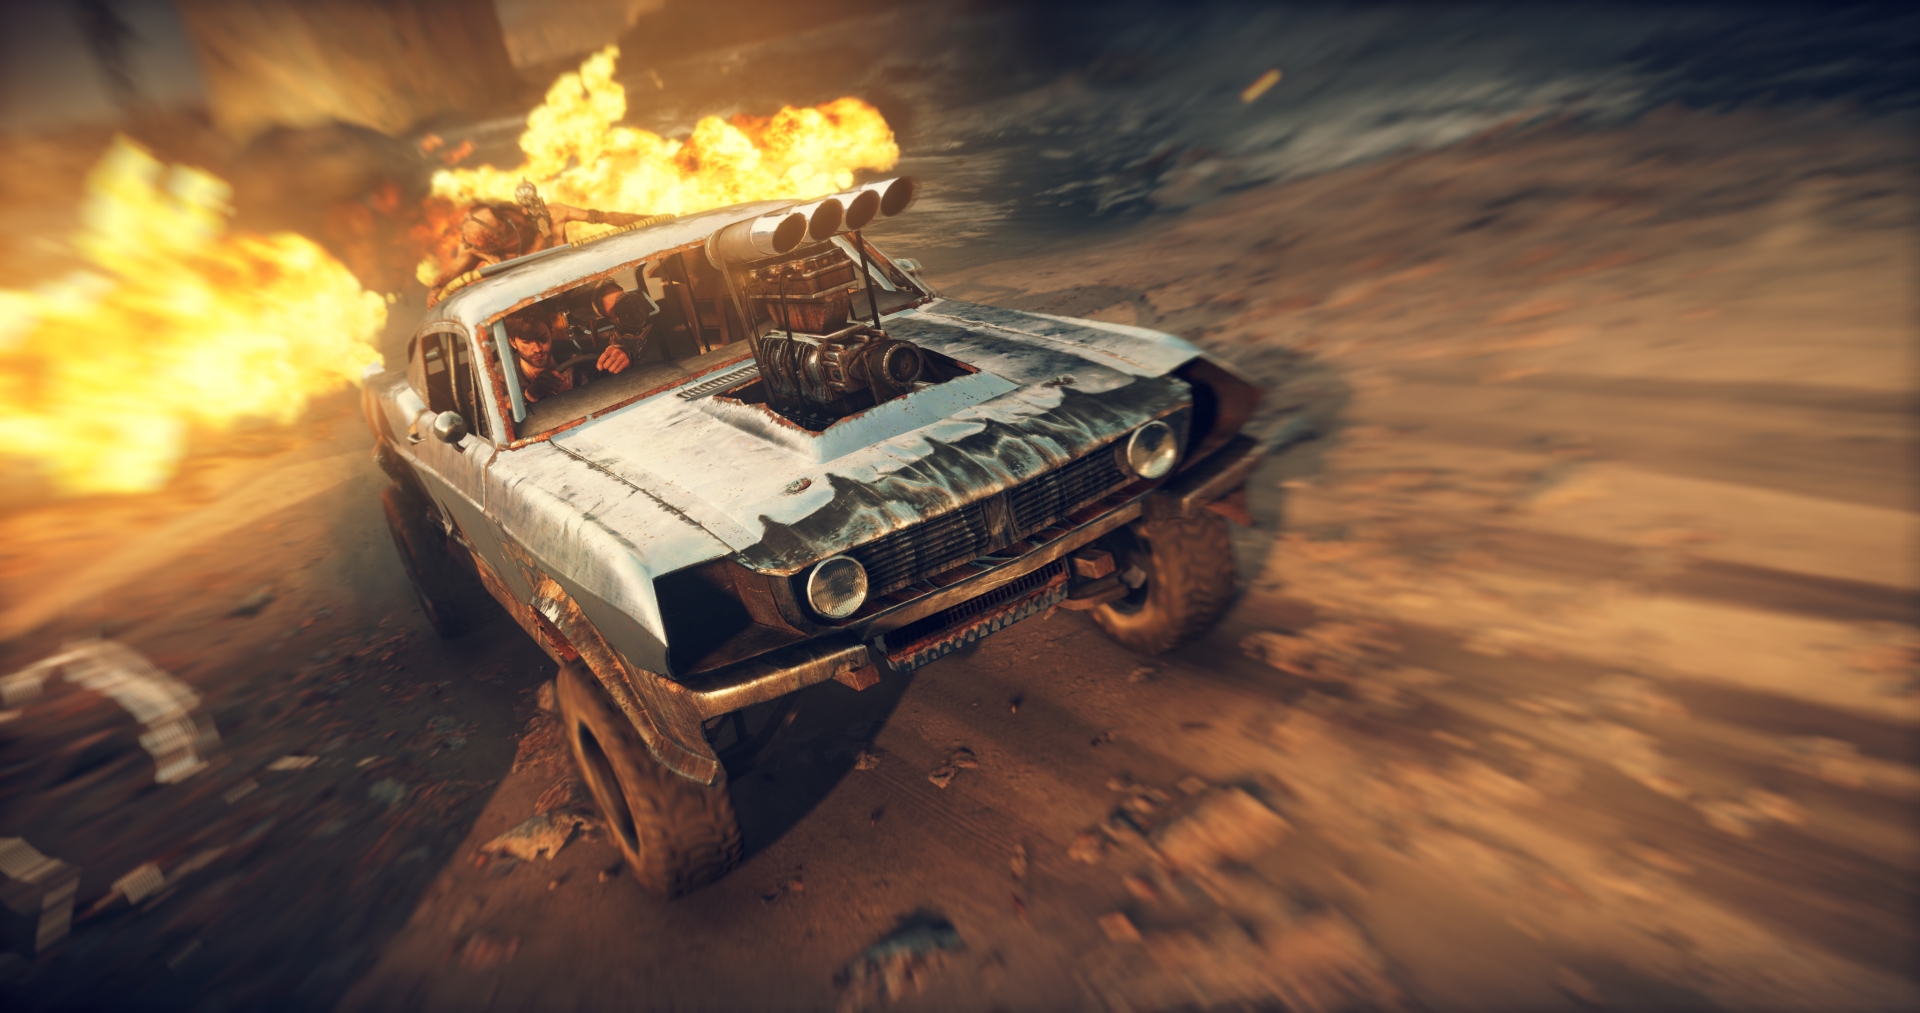 Mad Max Will Feature Highly Difficult Boss Battle Camps To Test